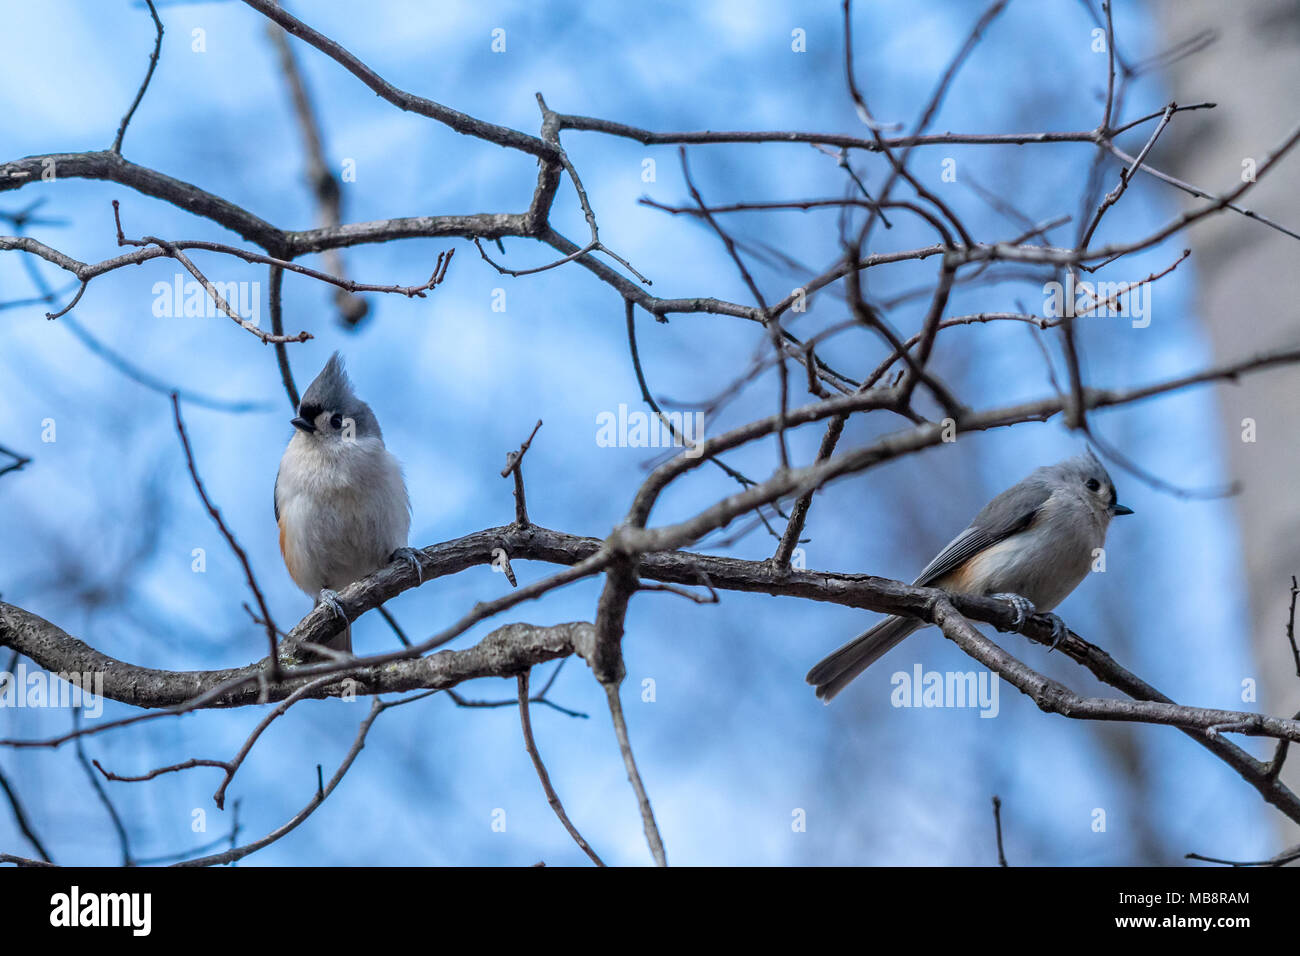 Two Tufted Titmouse (Baeolophus bicolor) birds perched on a branch. Stock Photo